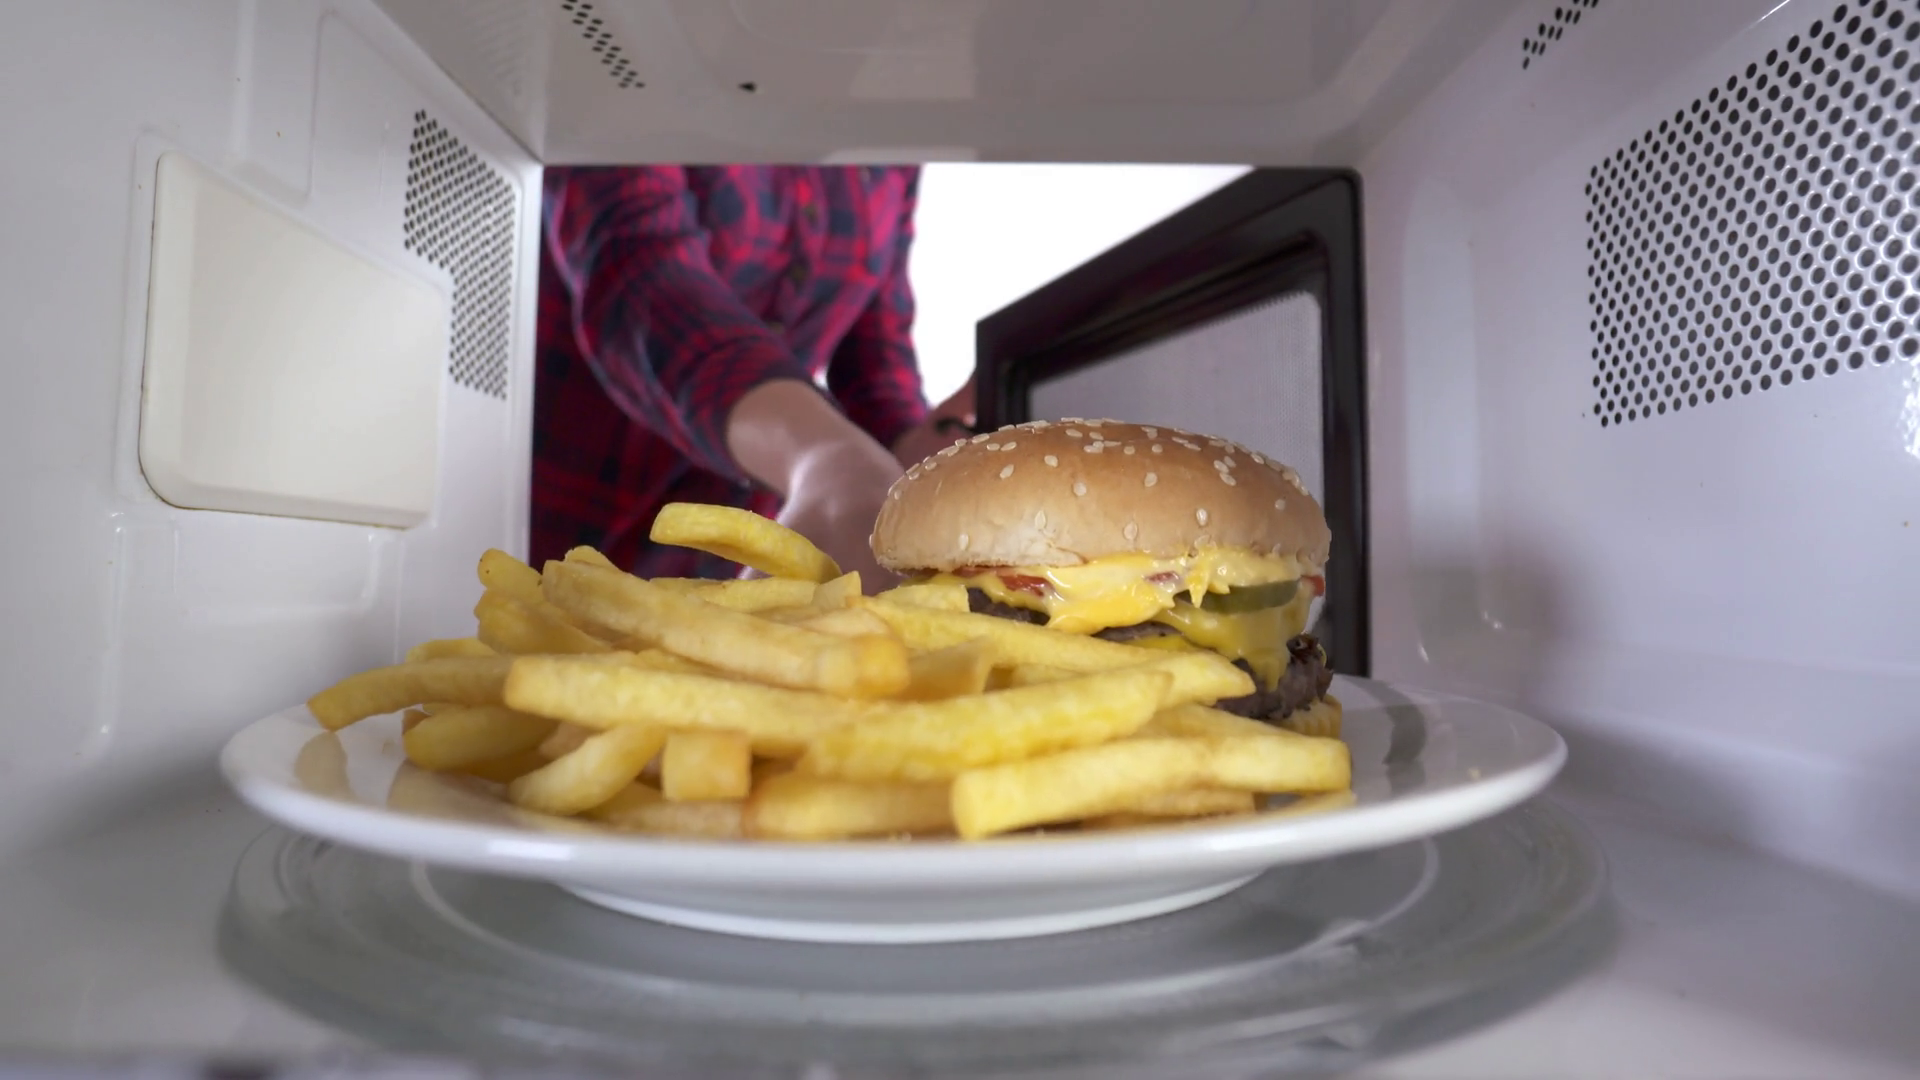 egirl using microwave to reheat food double hamburger with french fries reheating inside microwave oven 1